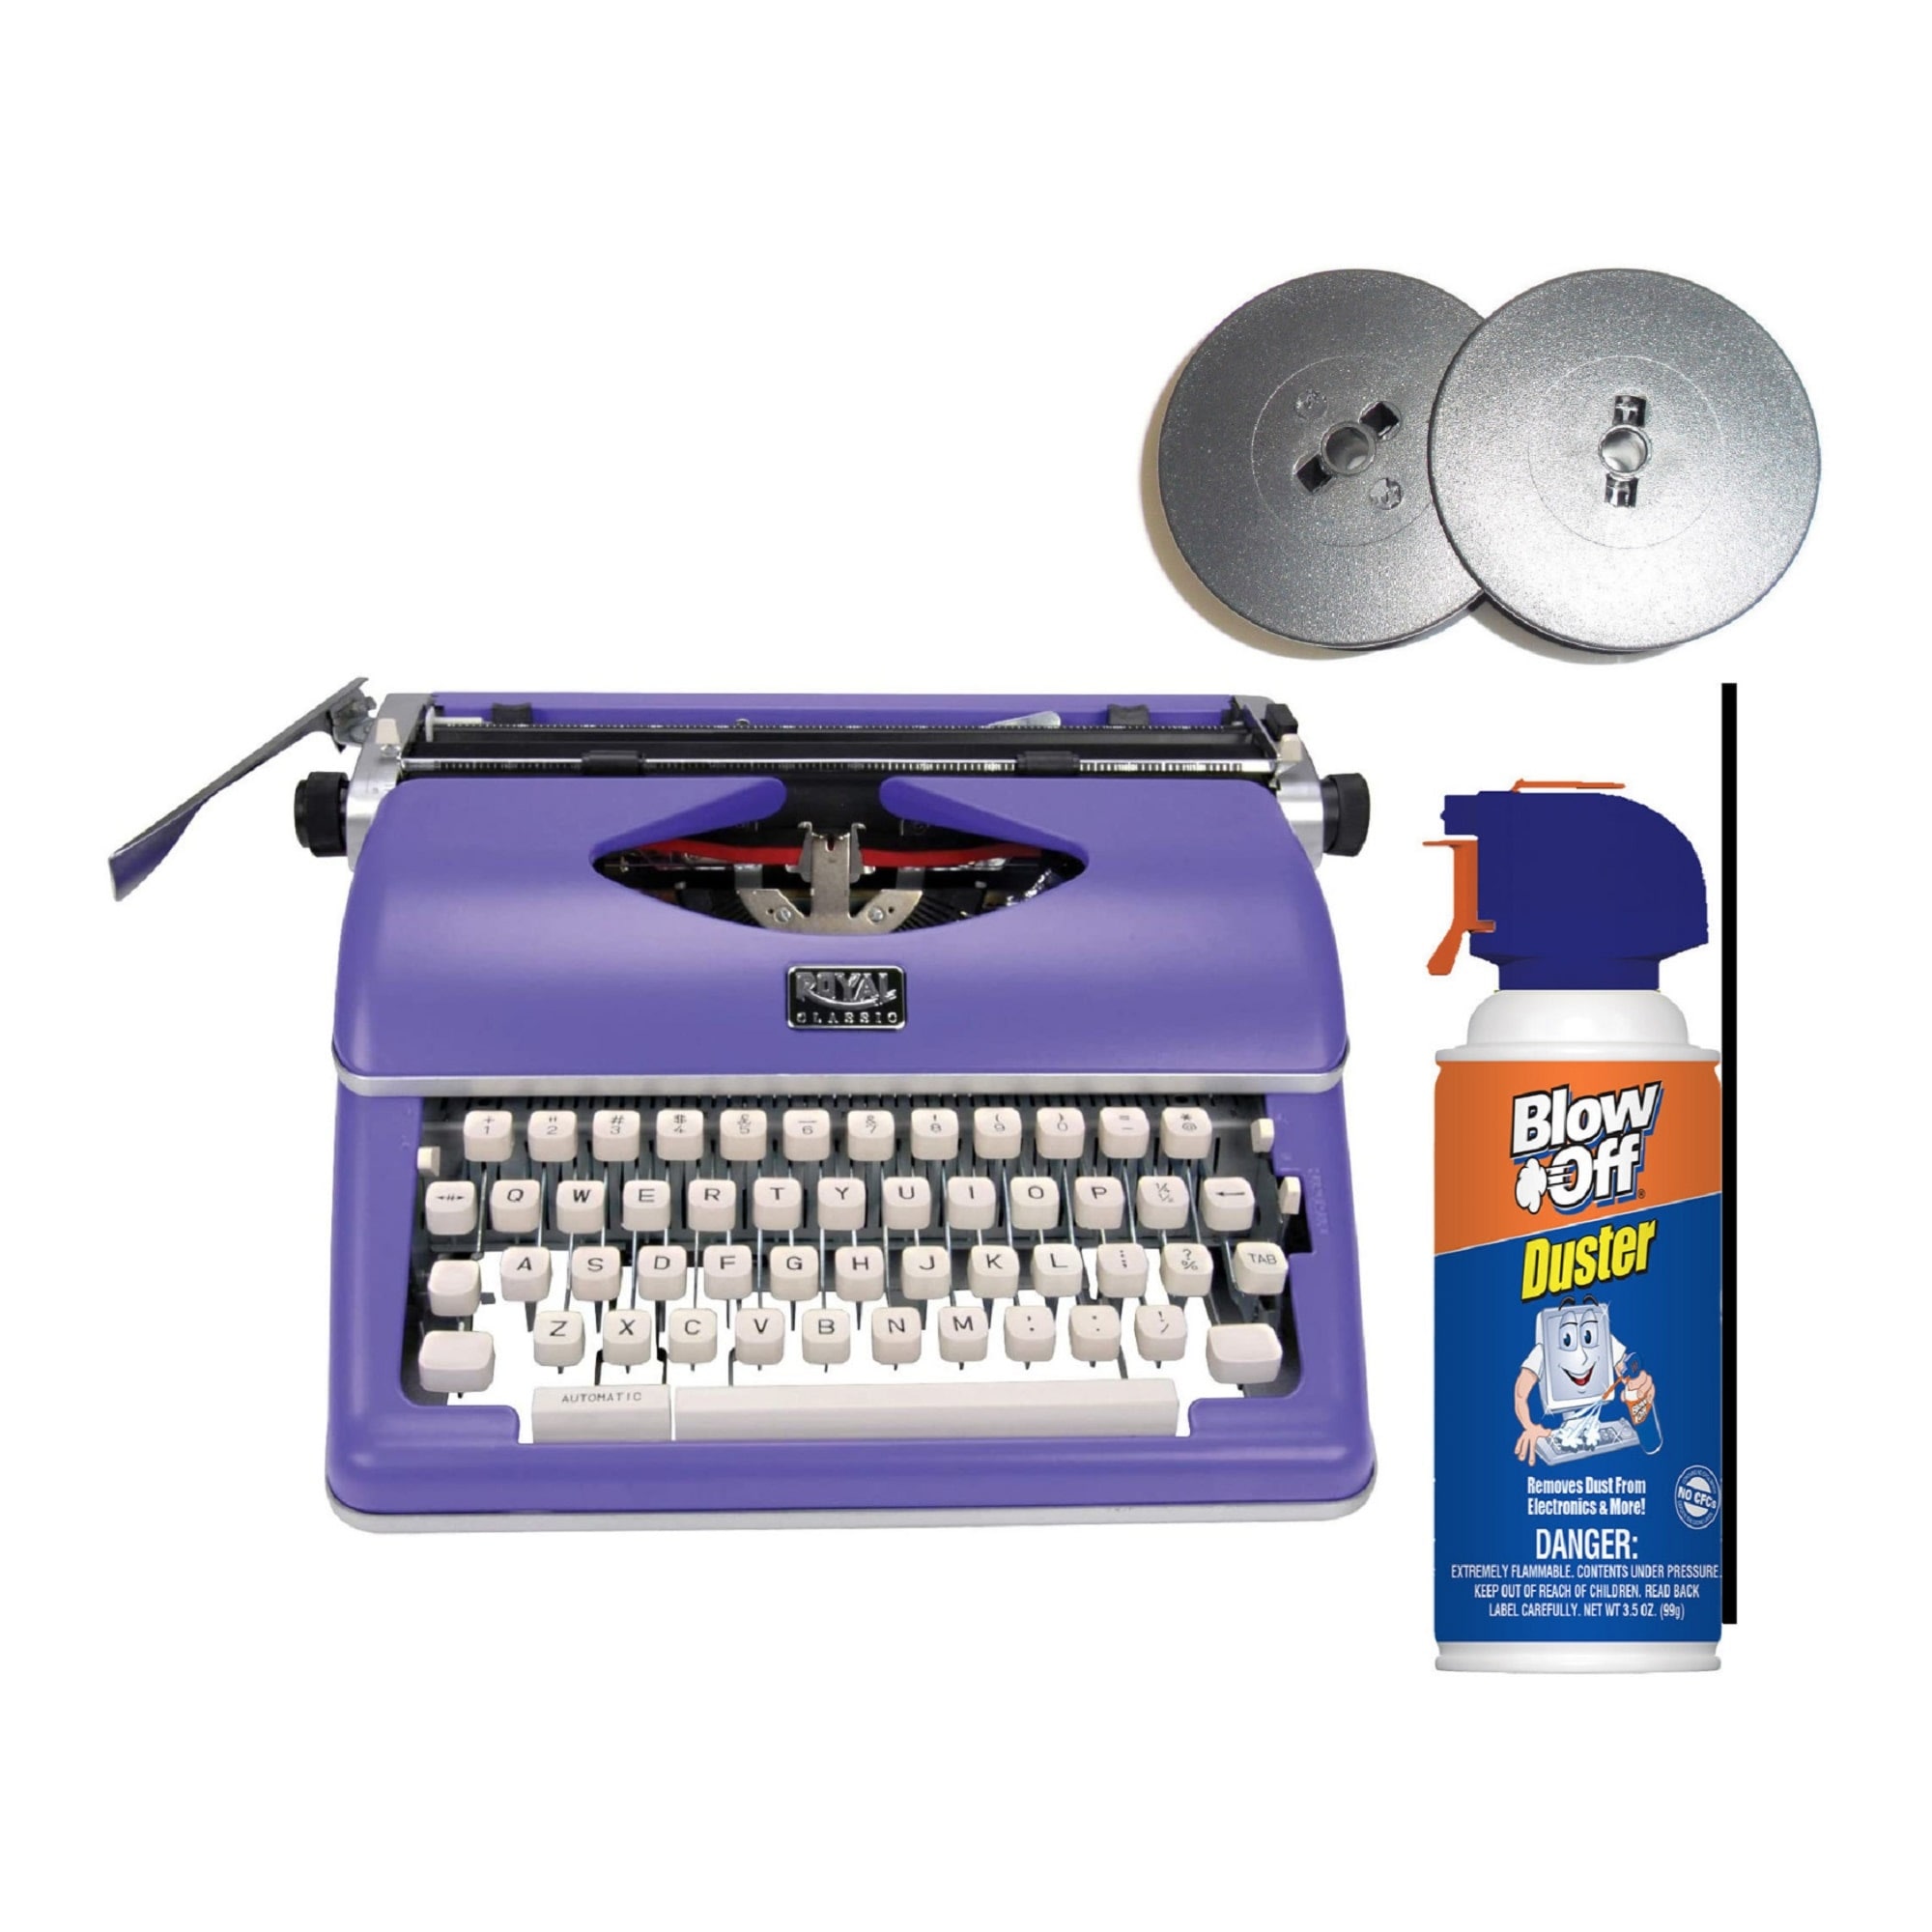 Royal Classic Retro Manual Typewriter (Purple) w/ Ribbons and Cleaqner - Purple